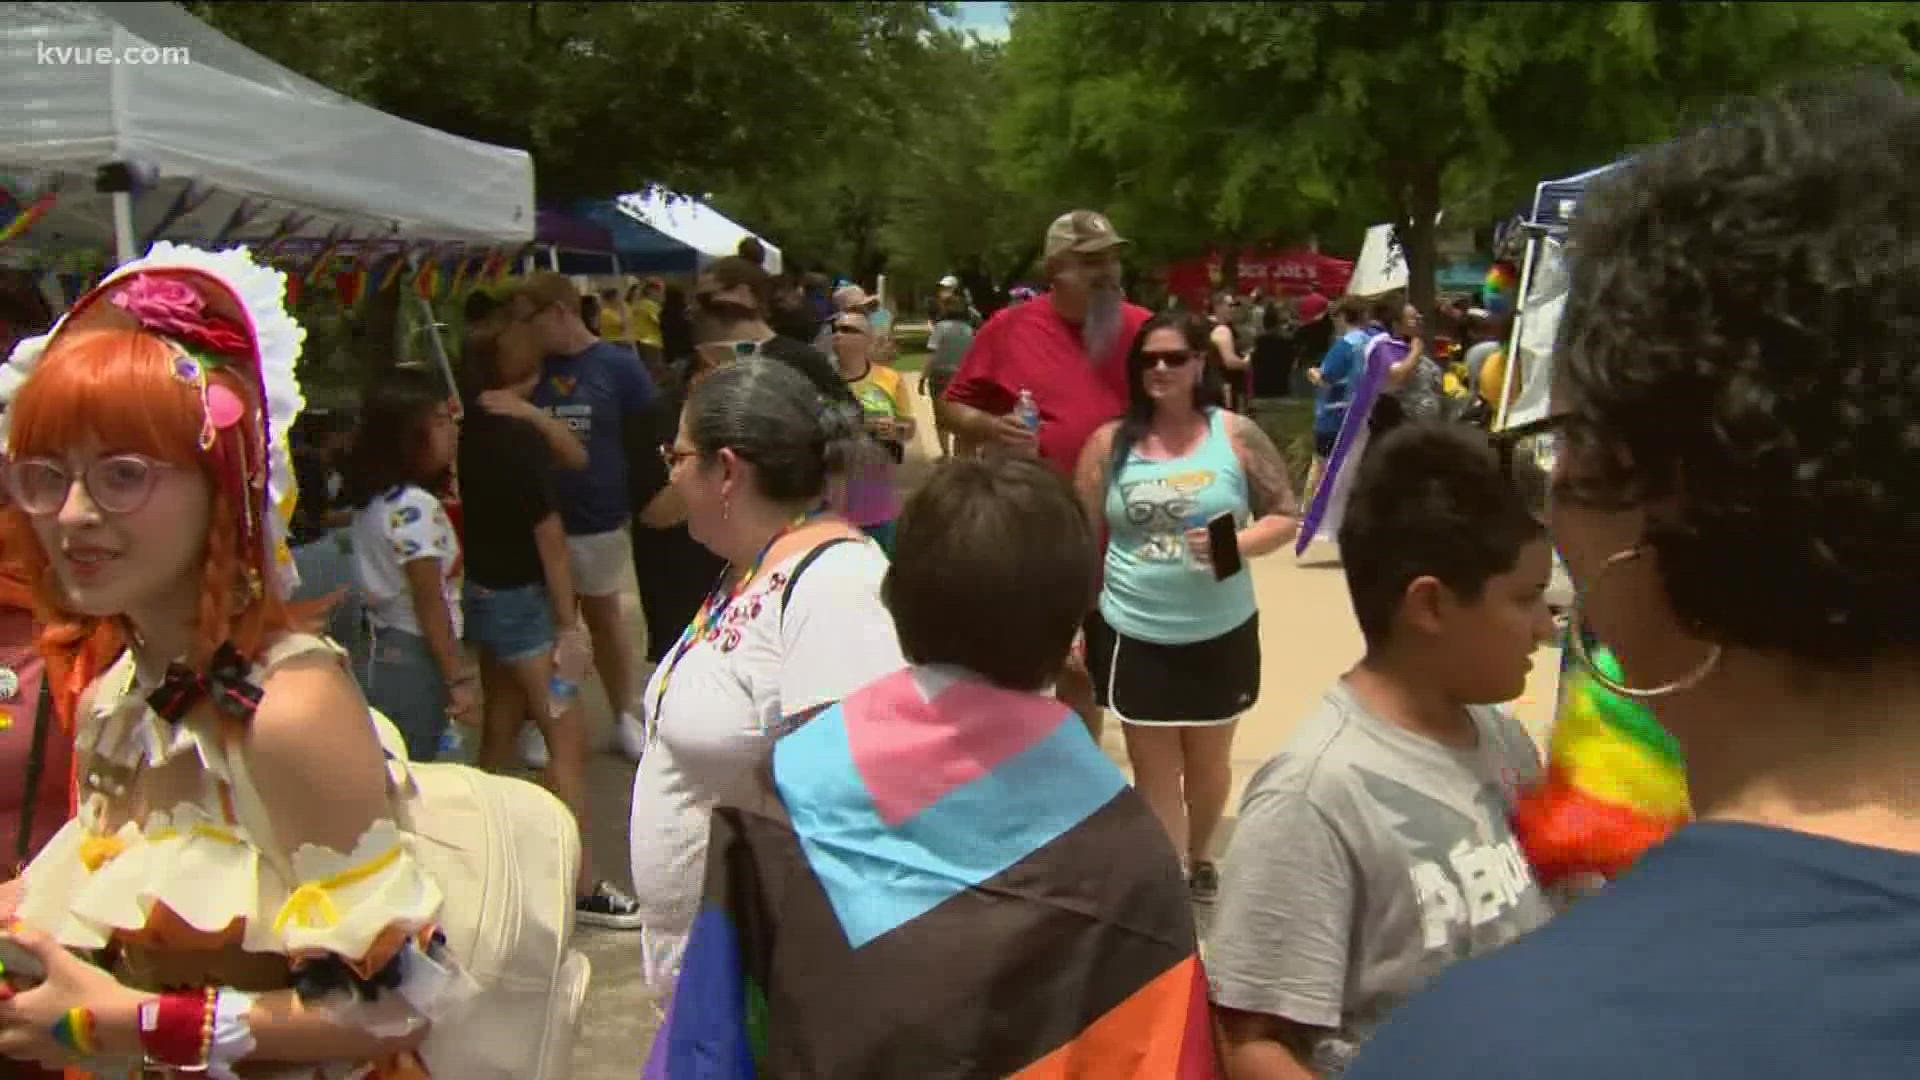 Organizers weren't sure how the event would turn out, but Saturday's crowds indicated success.